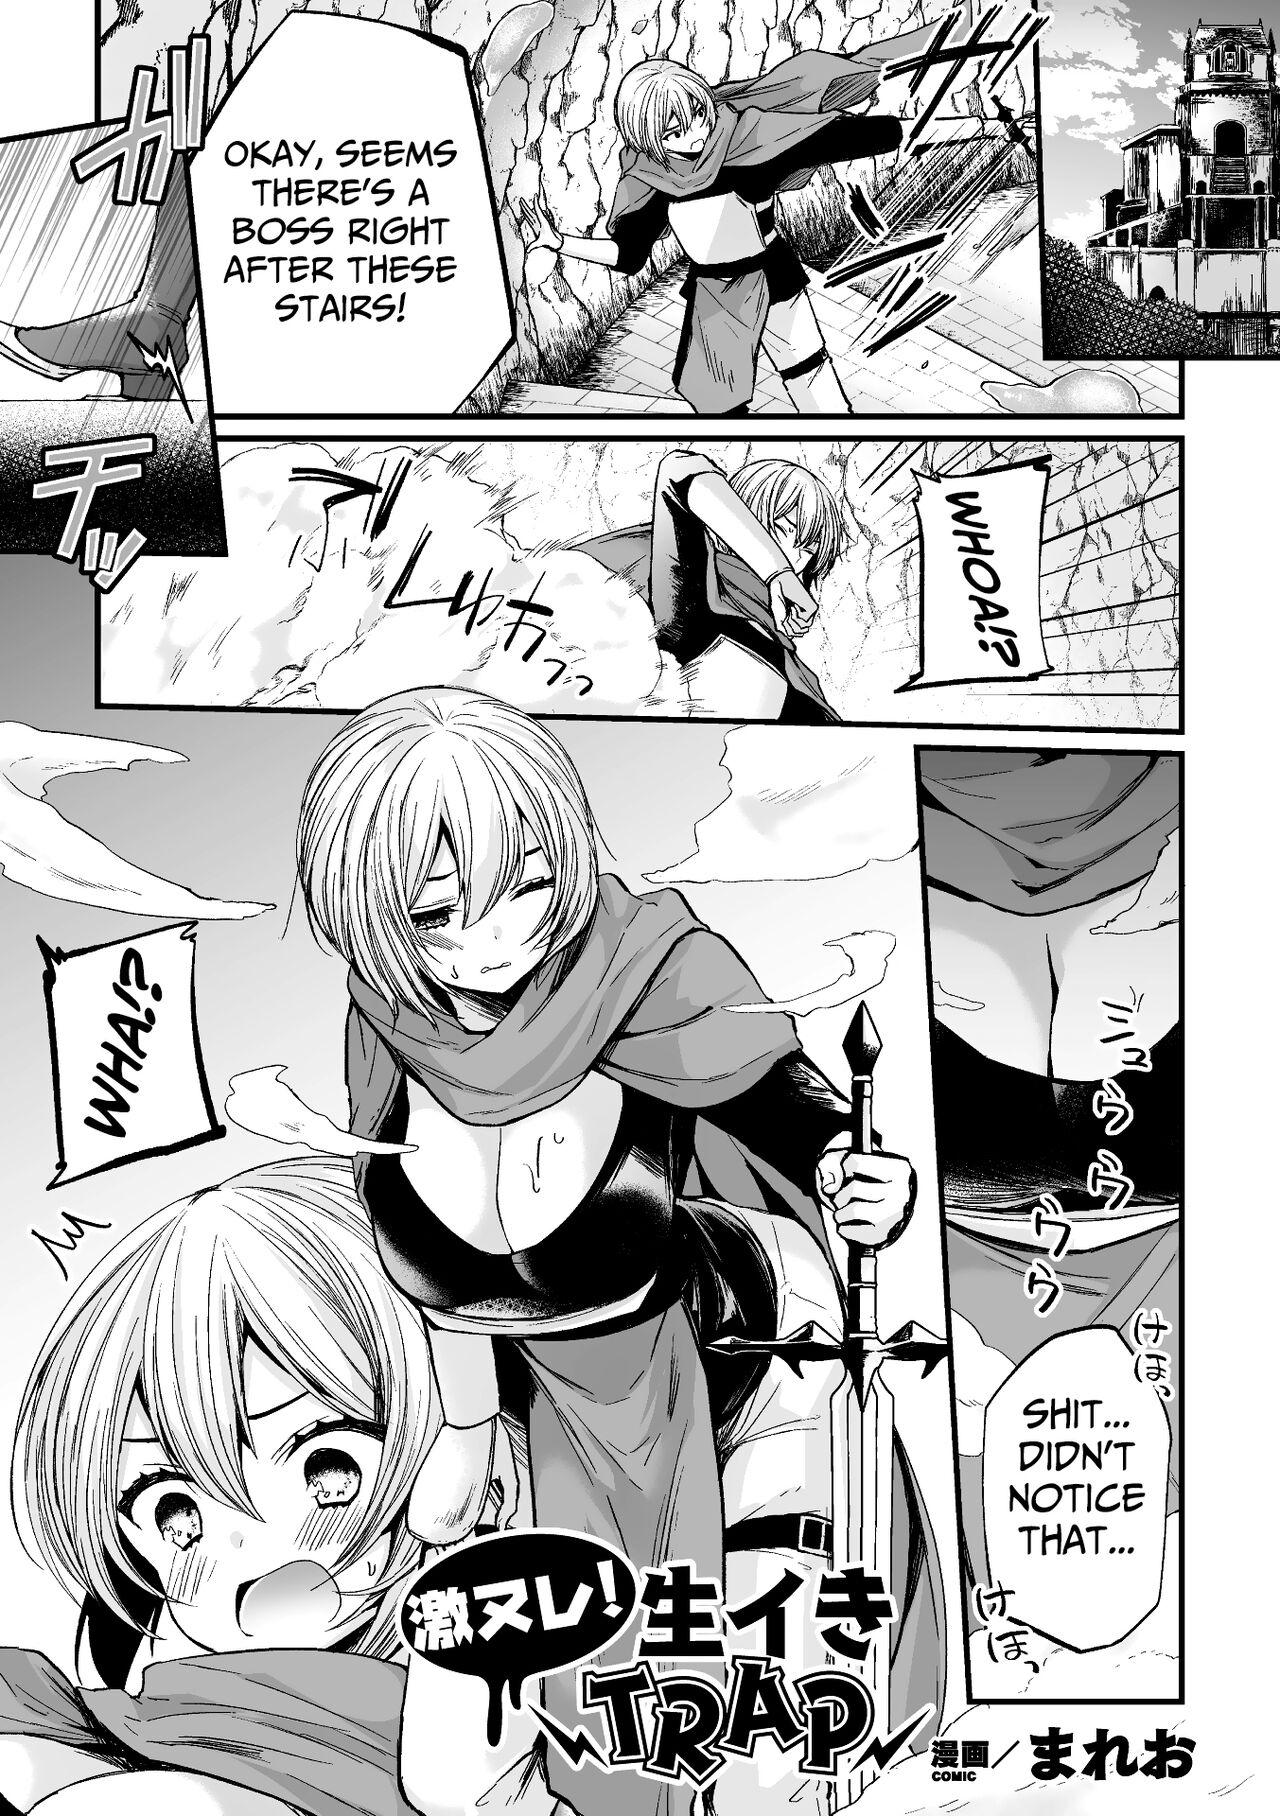 Oral Sex Gekinure! Namaiki TRAP | Rough TRAP in the Raw! - Ero trap dungeon Monster Dick - Page 1